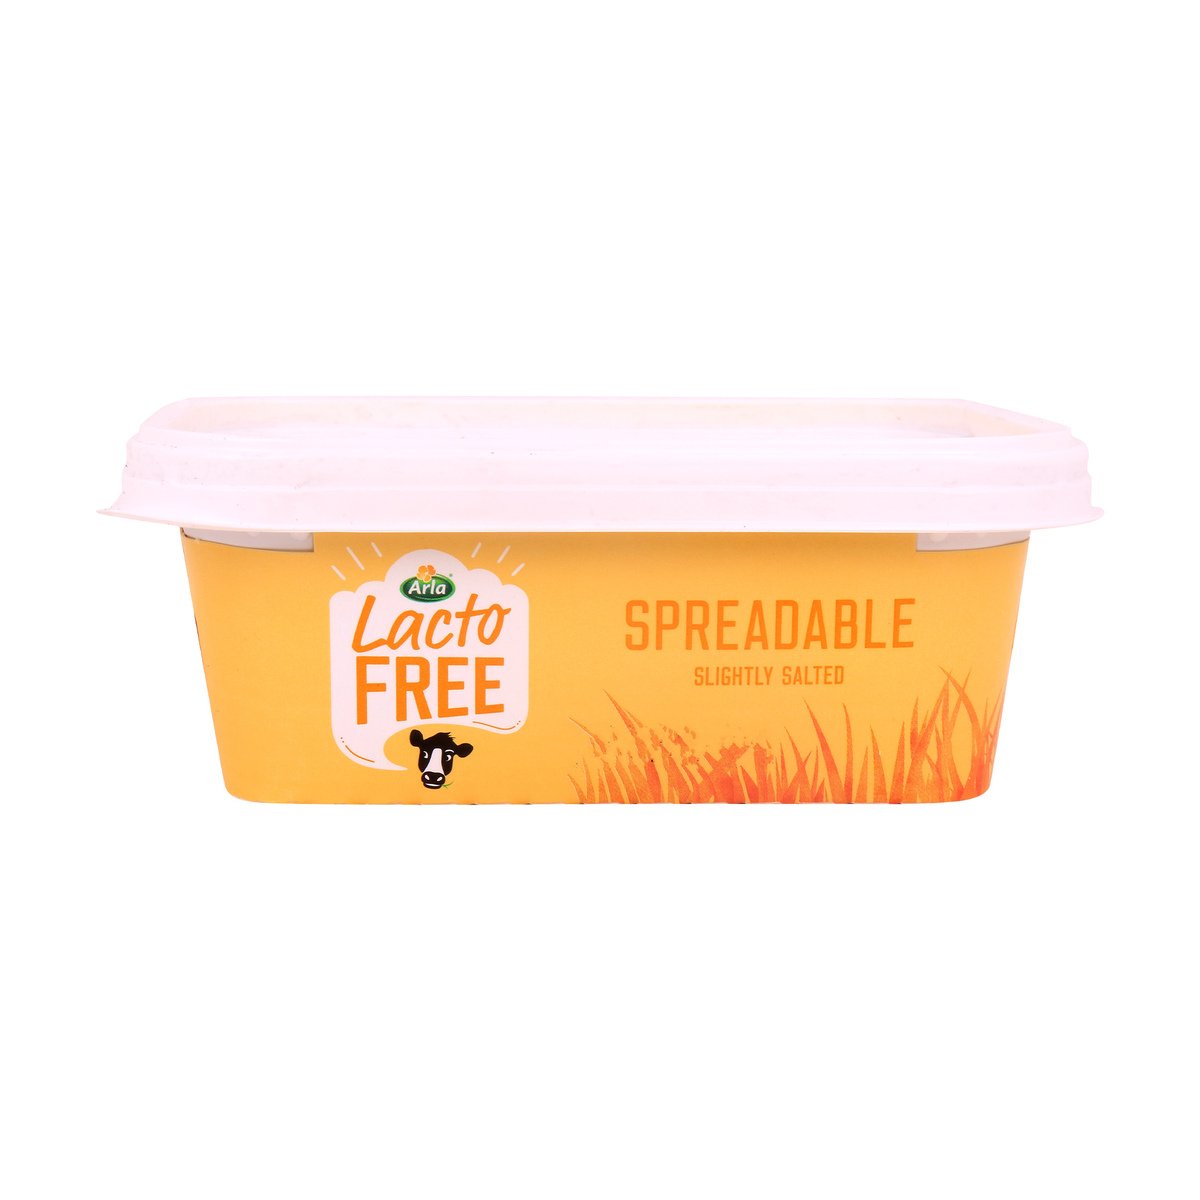 Arla Lacto Free Spreadable Slightly Salted 250 g